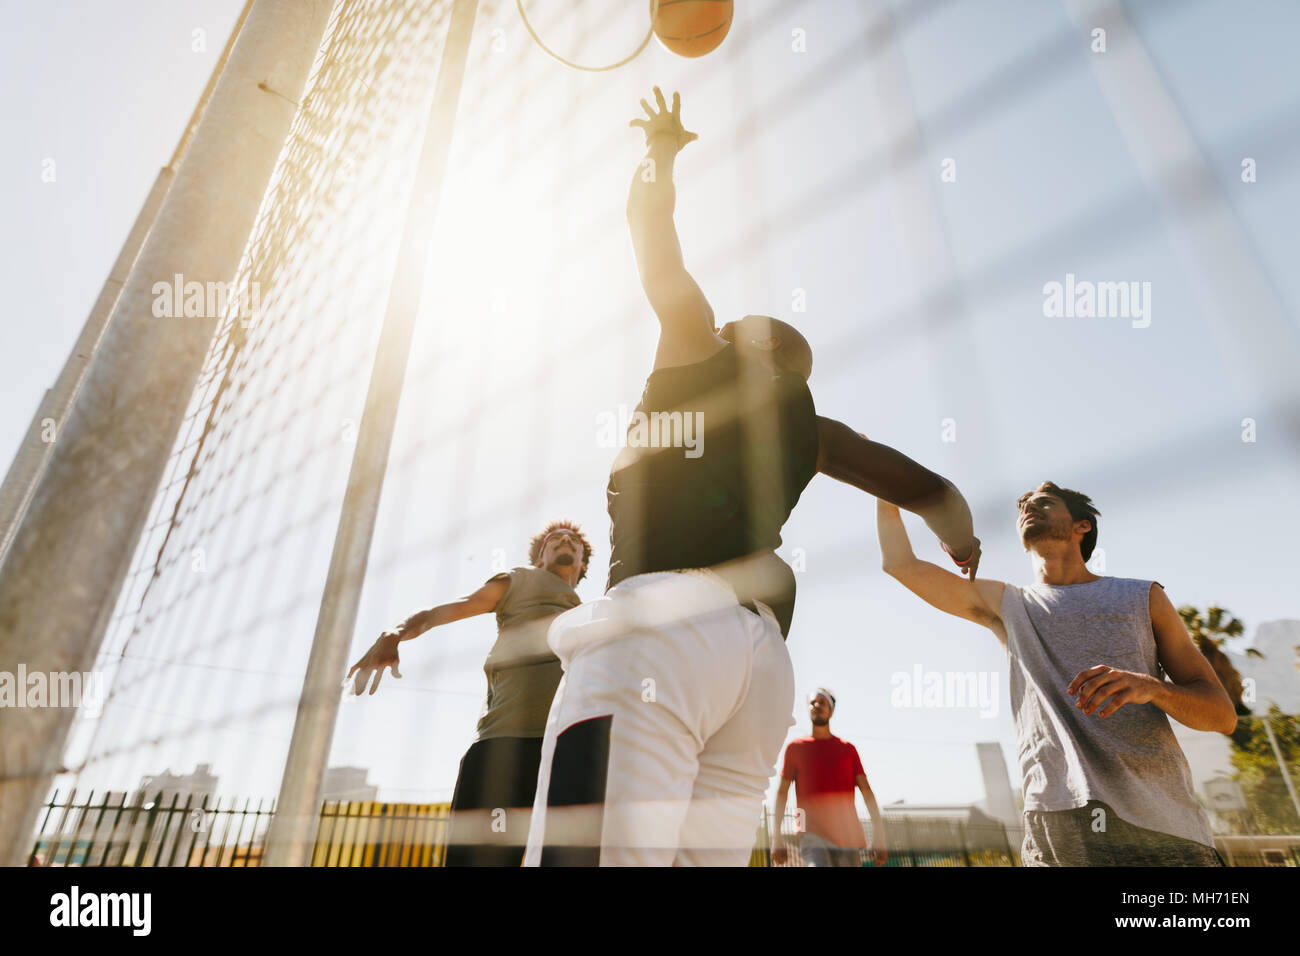 Four men playing basketball in a basketball court on a sunny day. Man jumping high to throw the ball in the basket. Stock Photo